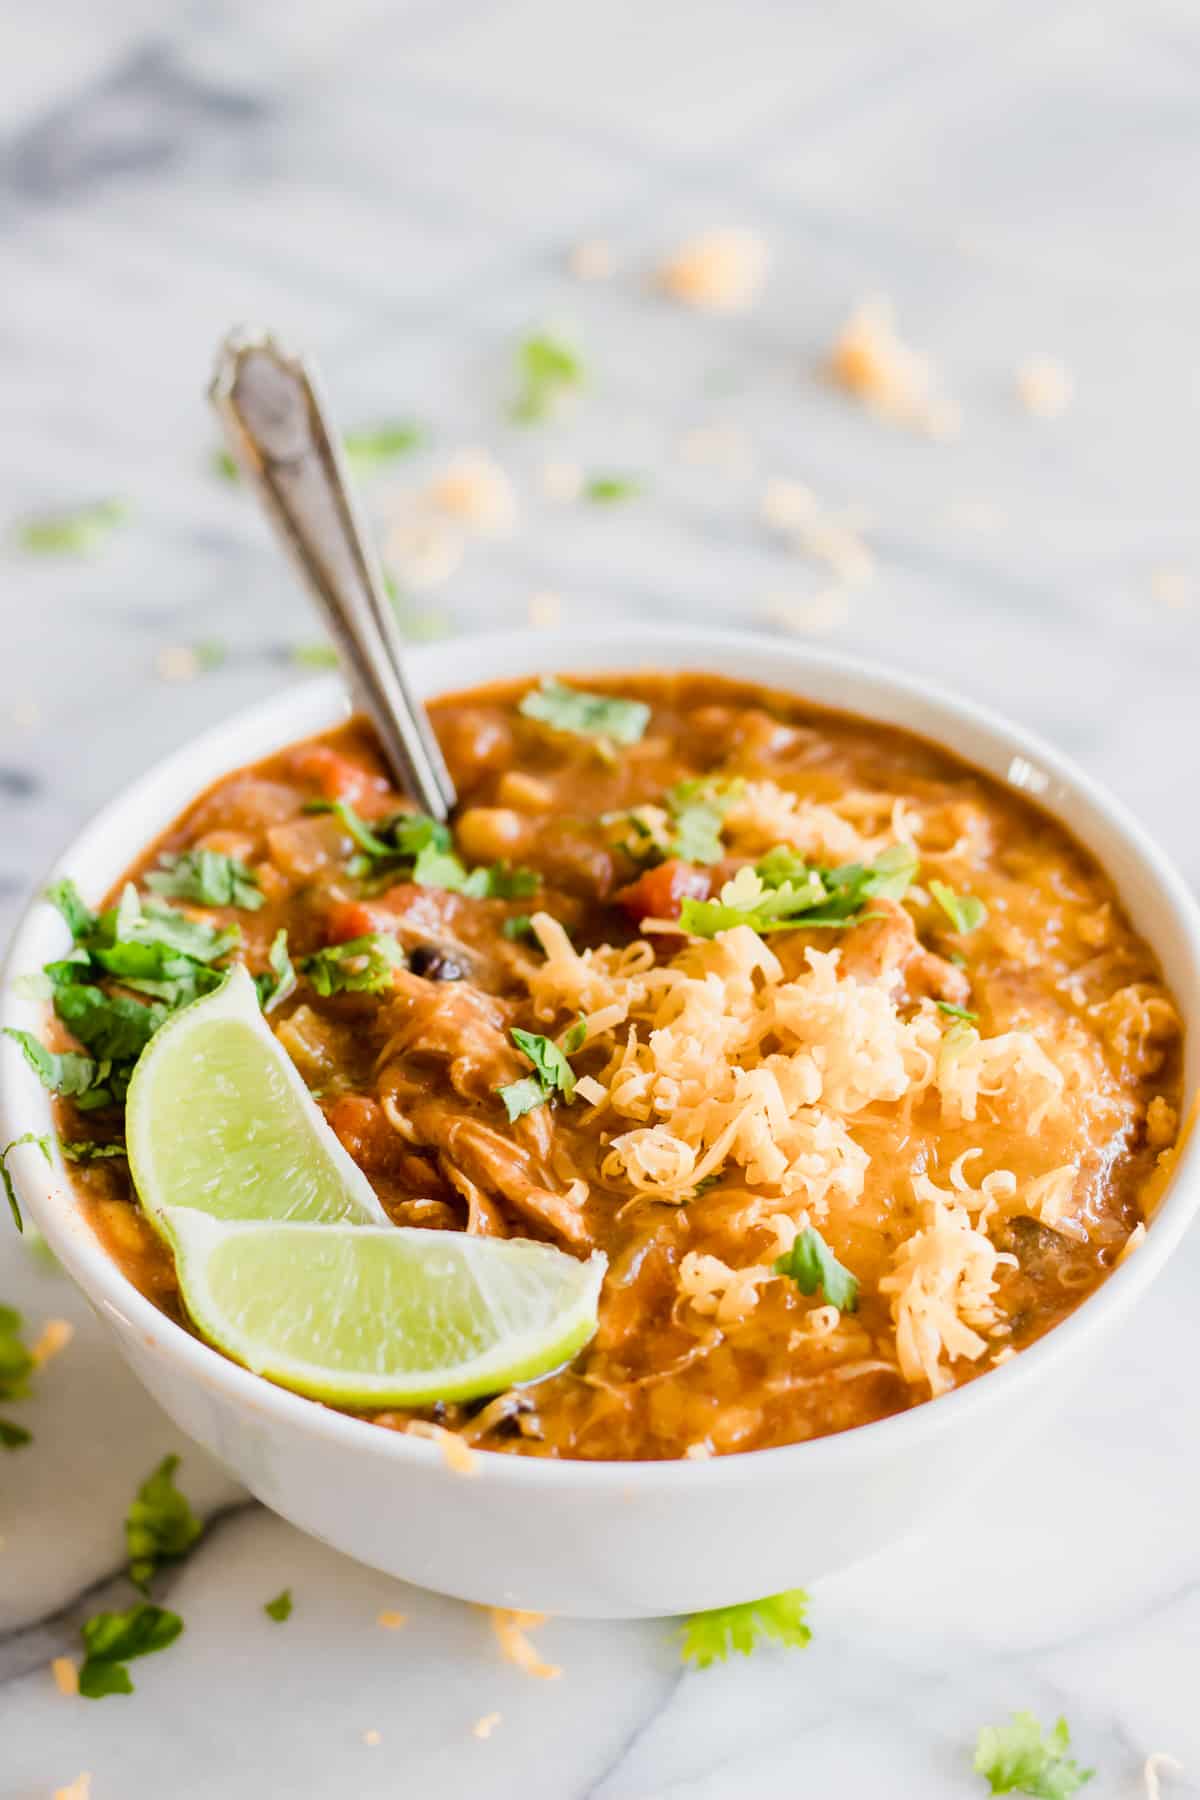 A spoon digging into a bowl of slow cooker chicken enchilada soup.